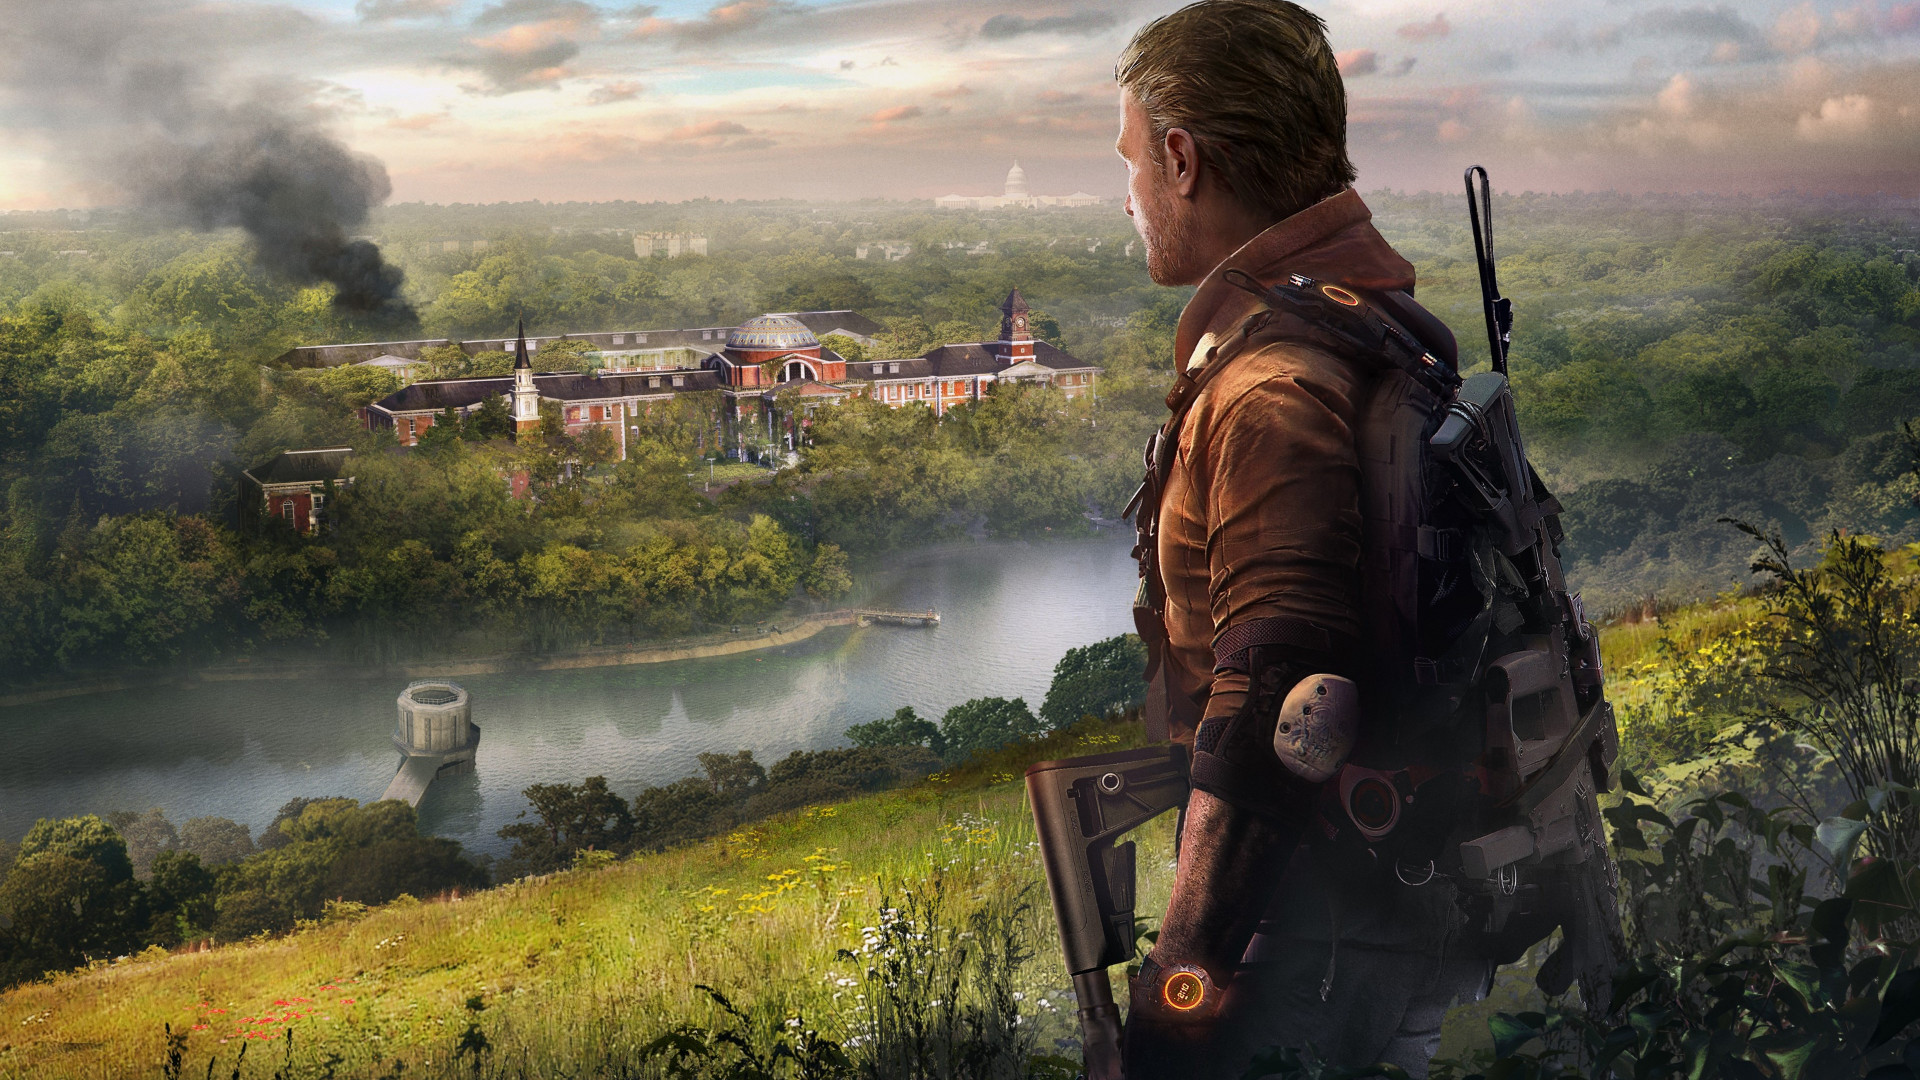 Download wallpaper Tom Clancys The Division 2 Episodes 1920x1080 1920x1080